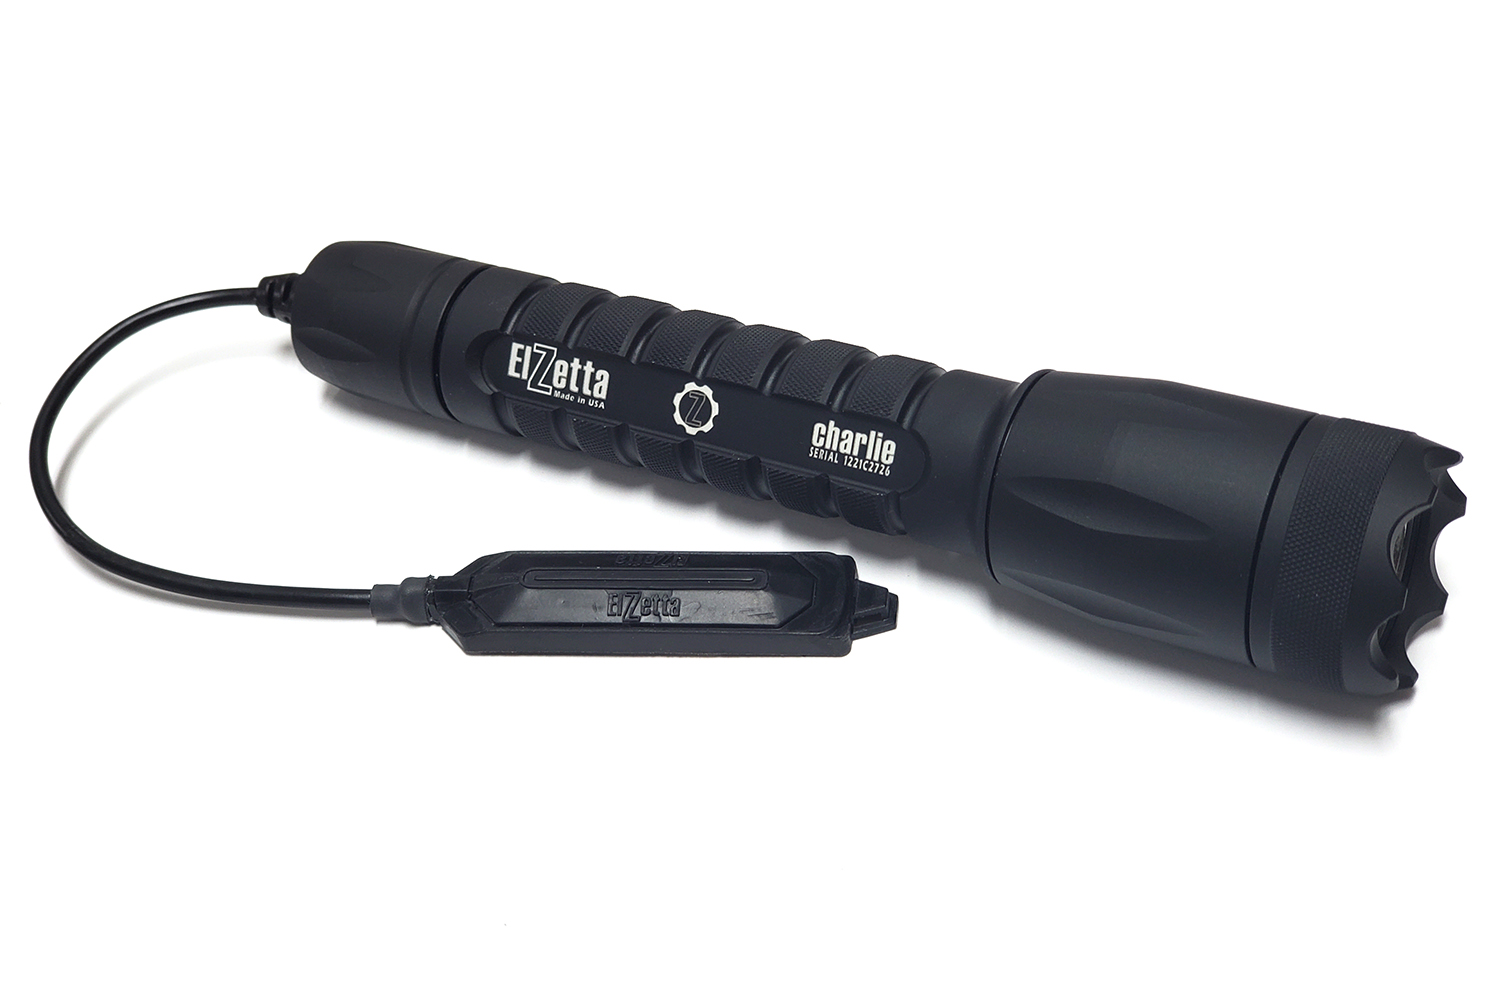 Charlie High Candela 3-Cell Flashlight with Crenelated Bezel and 5-inch Tape Switch